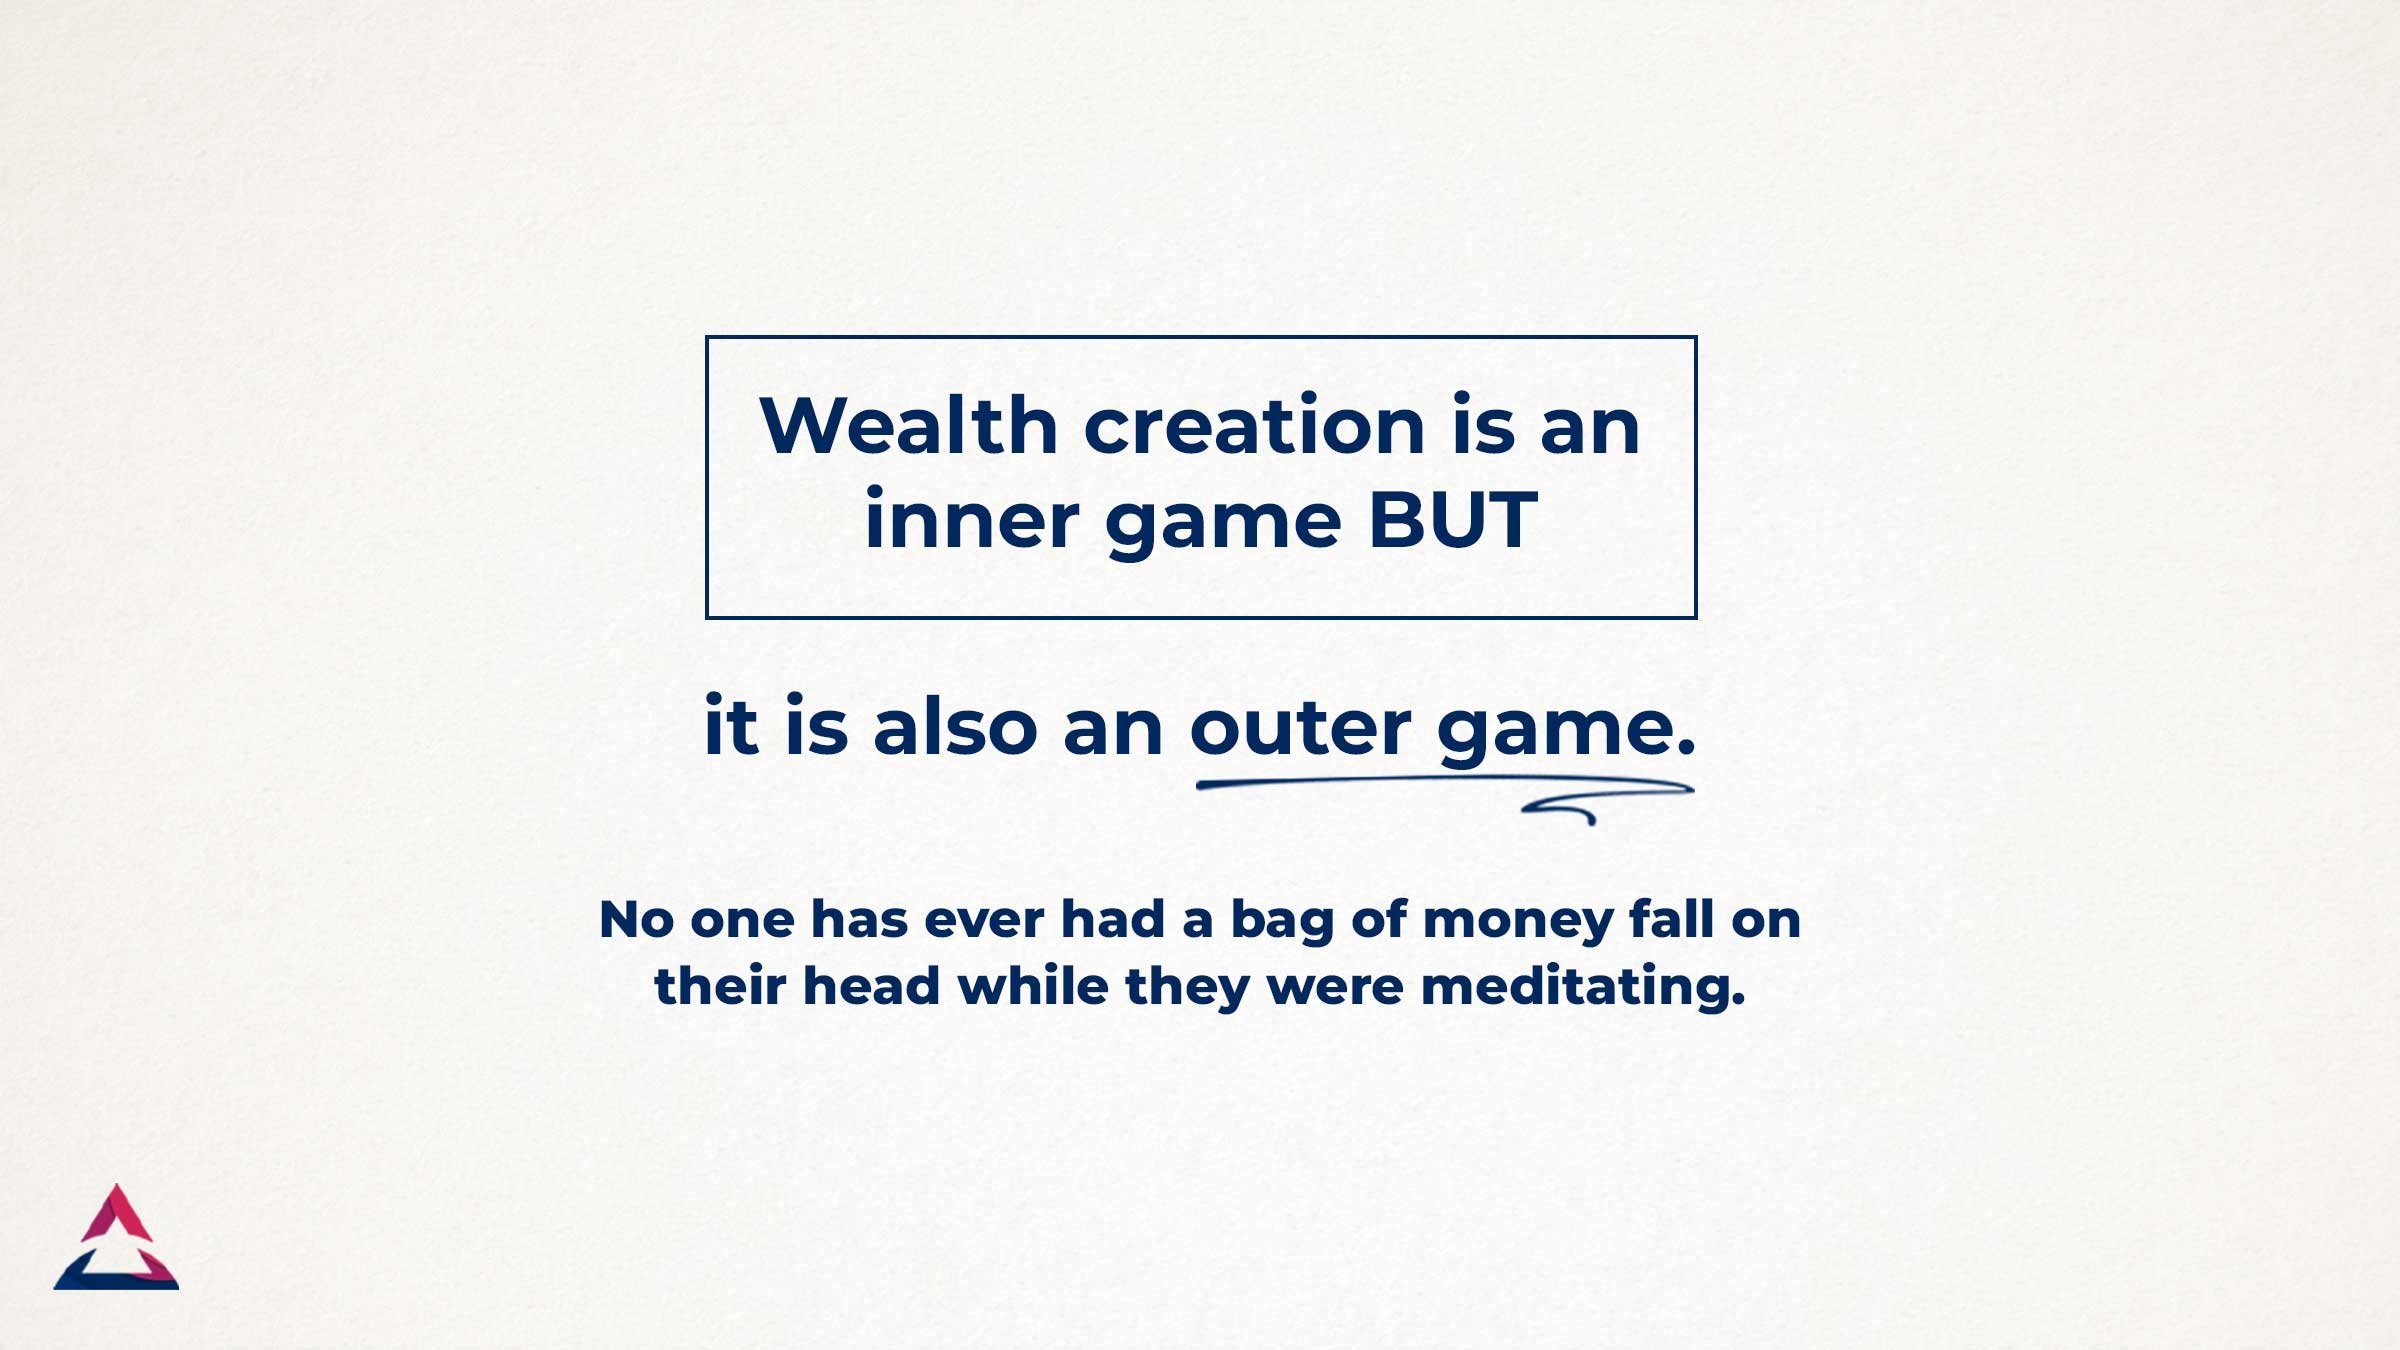 Wealth creation is an inner game